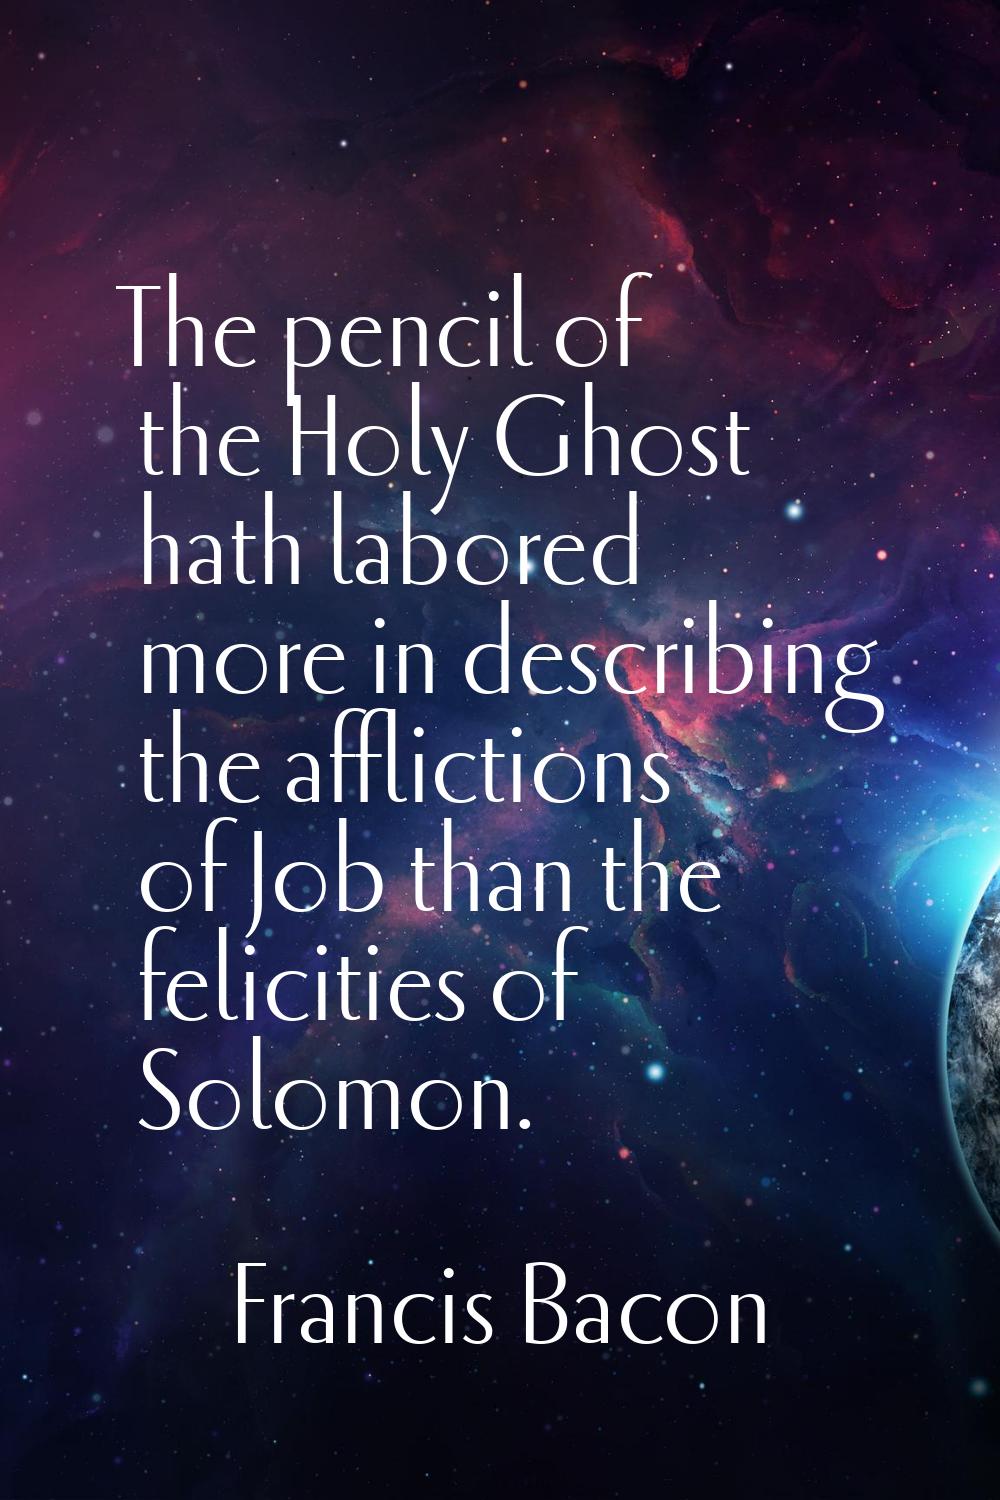 The pencil of the Holy Ghost hath labored more in describing the afflictions of Job than the felici